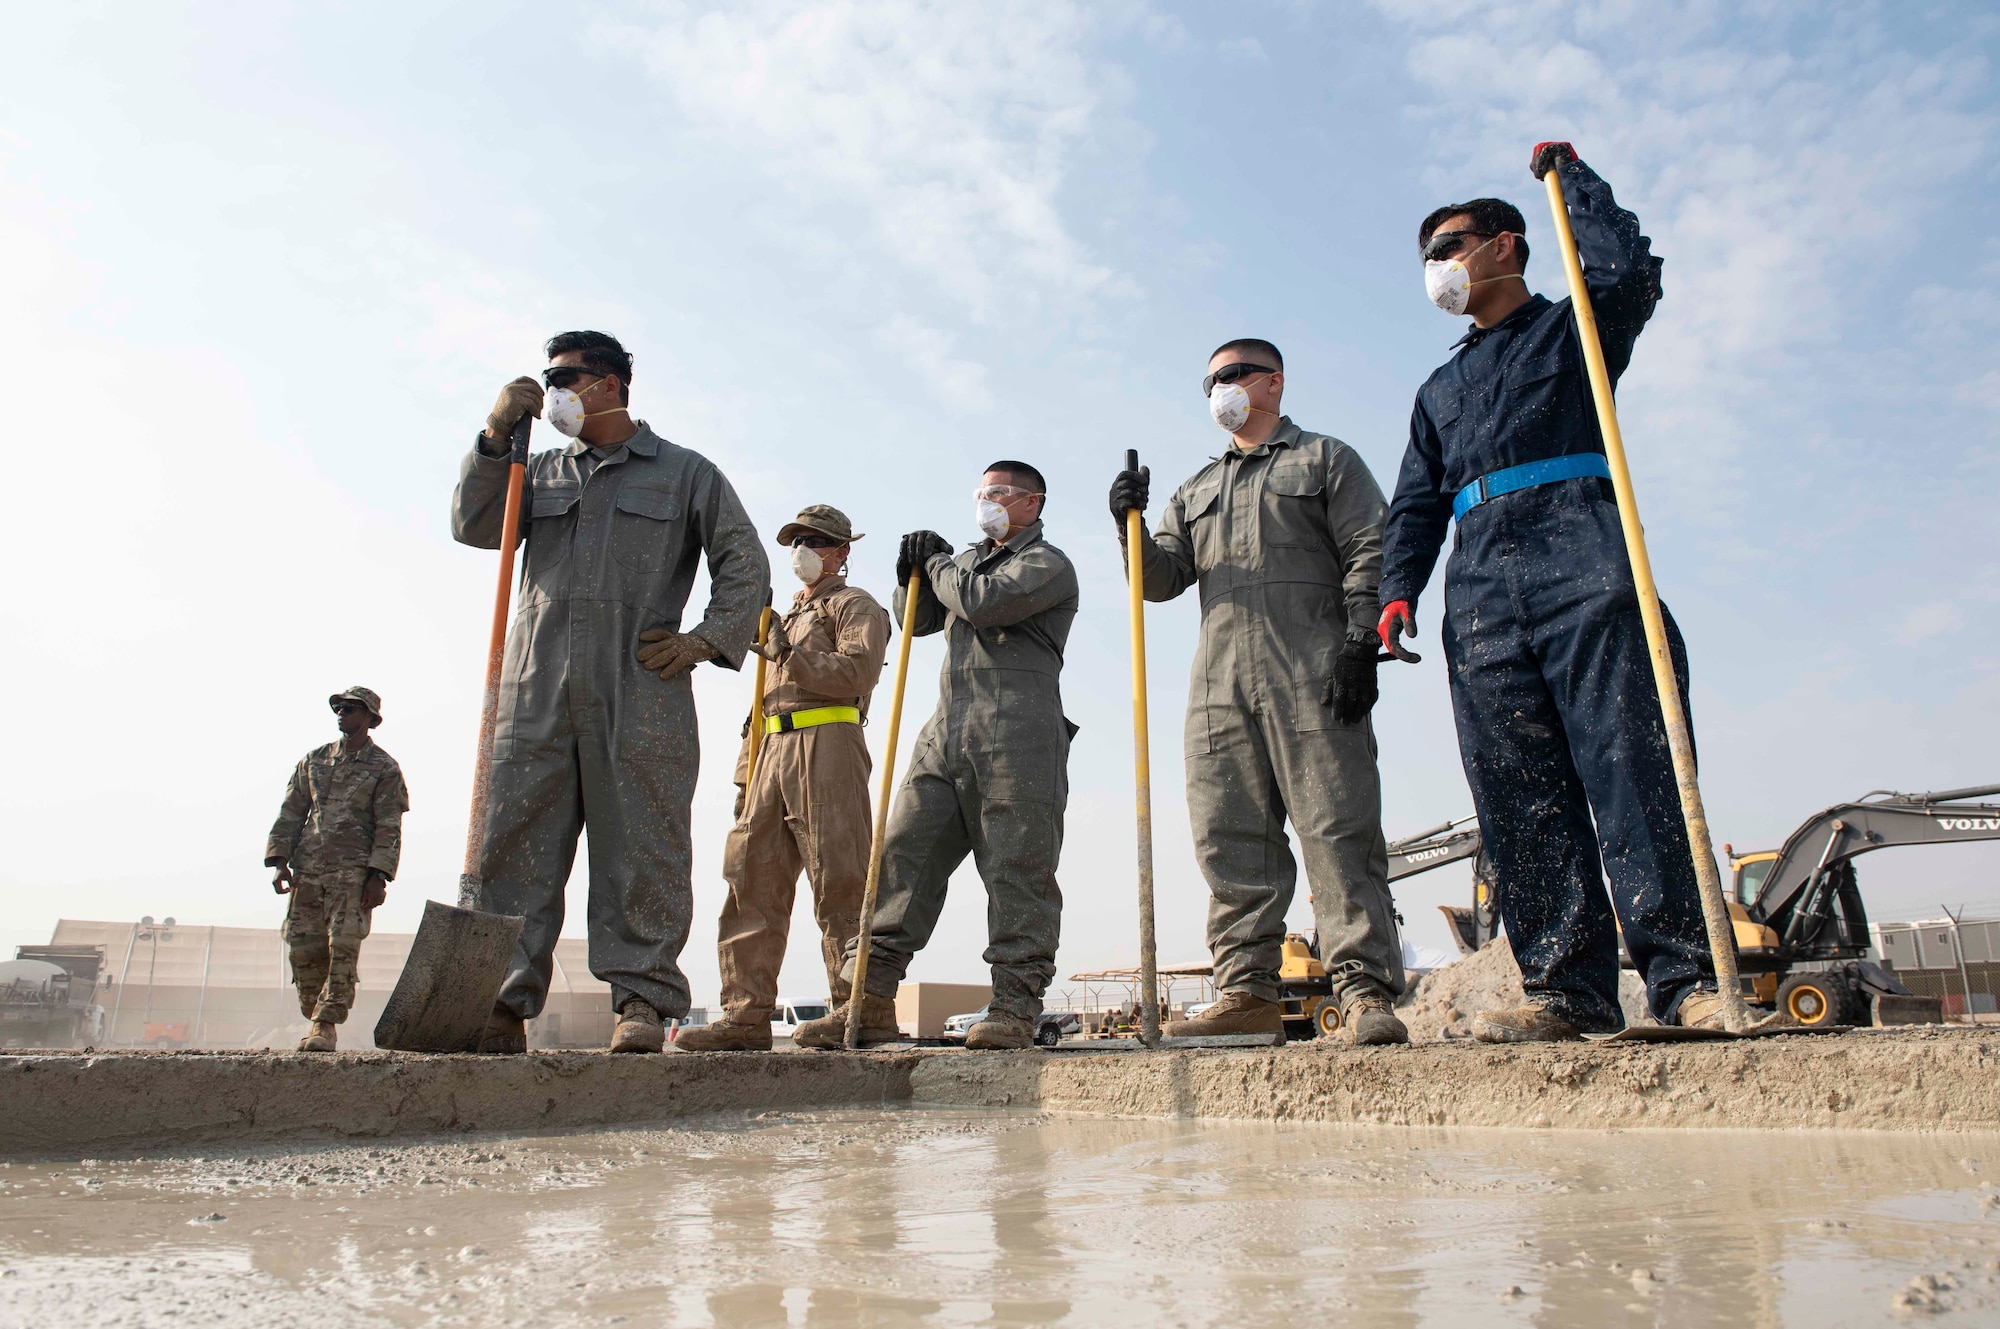 U.S. Air Force Airmen from the 386th Expeditionary Civil Engineer Squadron prepare to spread and even out rapid set concrete during a Rapid Airfield Damage Recovery training exercise at Ali Al Salem Air Base, Kuwait, Nov. 16, 2020. The materials, combined with new techniques and equipment, create stronger repairs allowing for thousands of passes for aircraft compared to the old repair process. (U.S. Air Force photo by Staff Sgt. Kenneth Boyton)